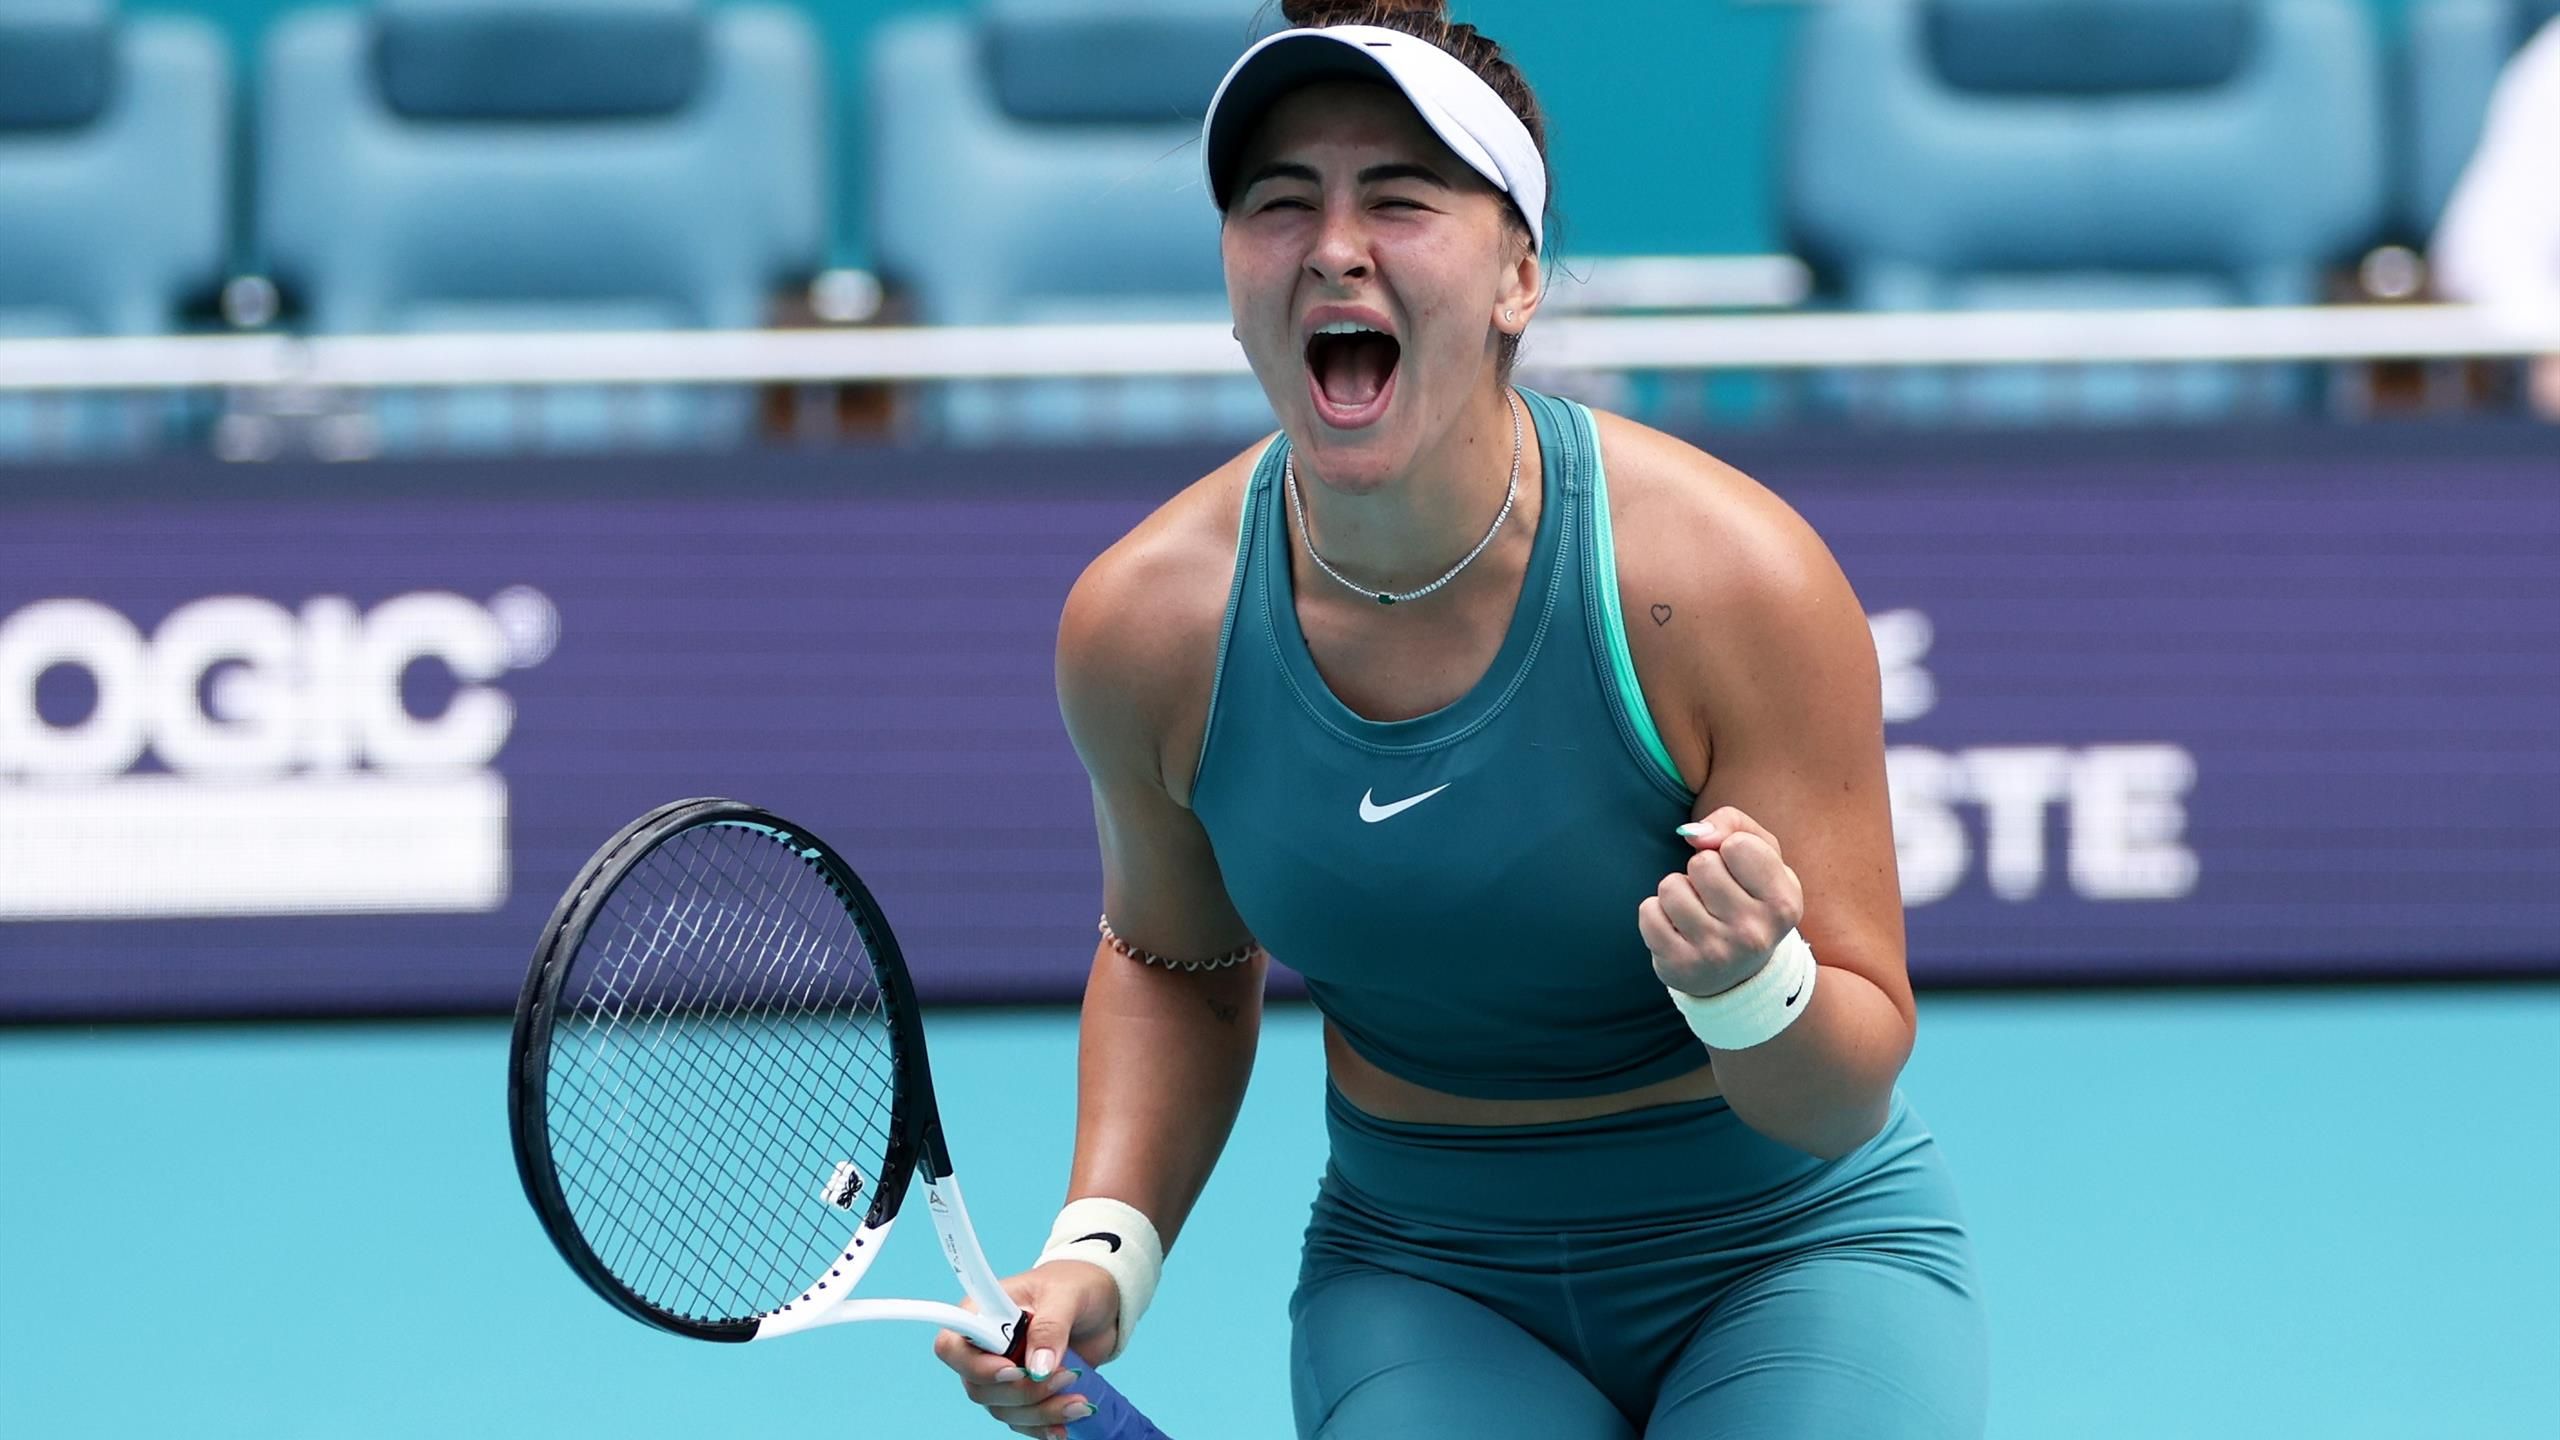 Miami Open 2023 Bianca Andreescu marches on with win over Sofia Kenin, Belinda Bencic becomes latest big name to fall